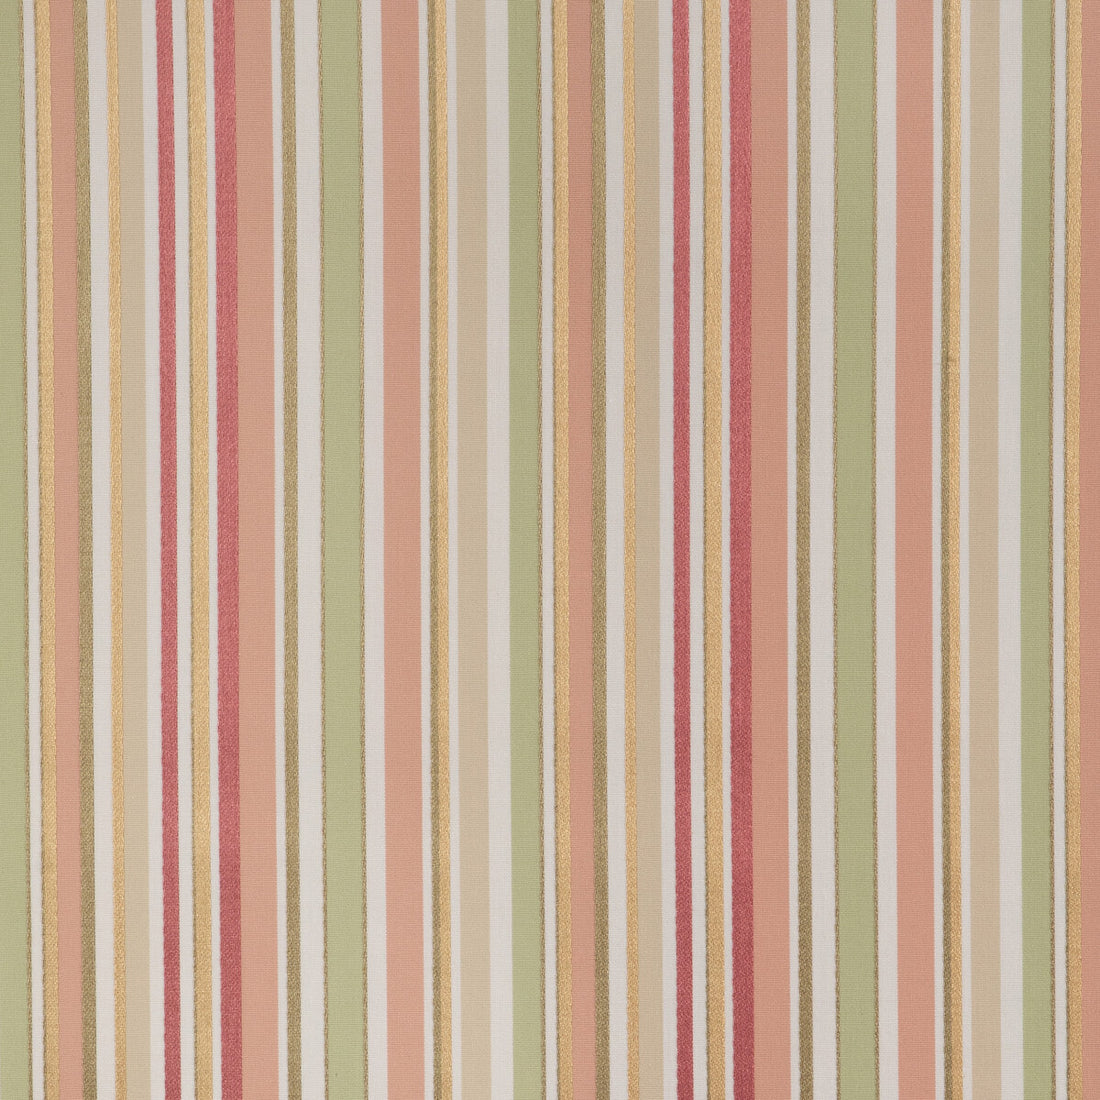 Siders Stripe fabric in blush/sage color - pattern 2023103.73.0 - by Lee Jofa in the Highfield Stripes And Plaids collection